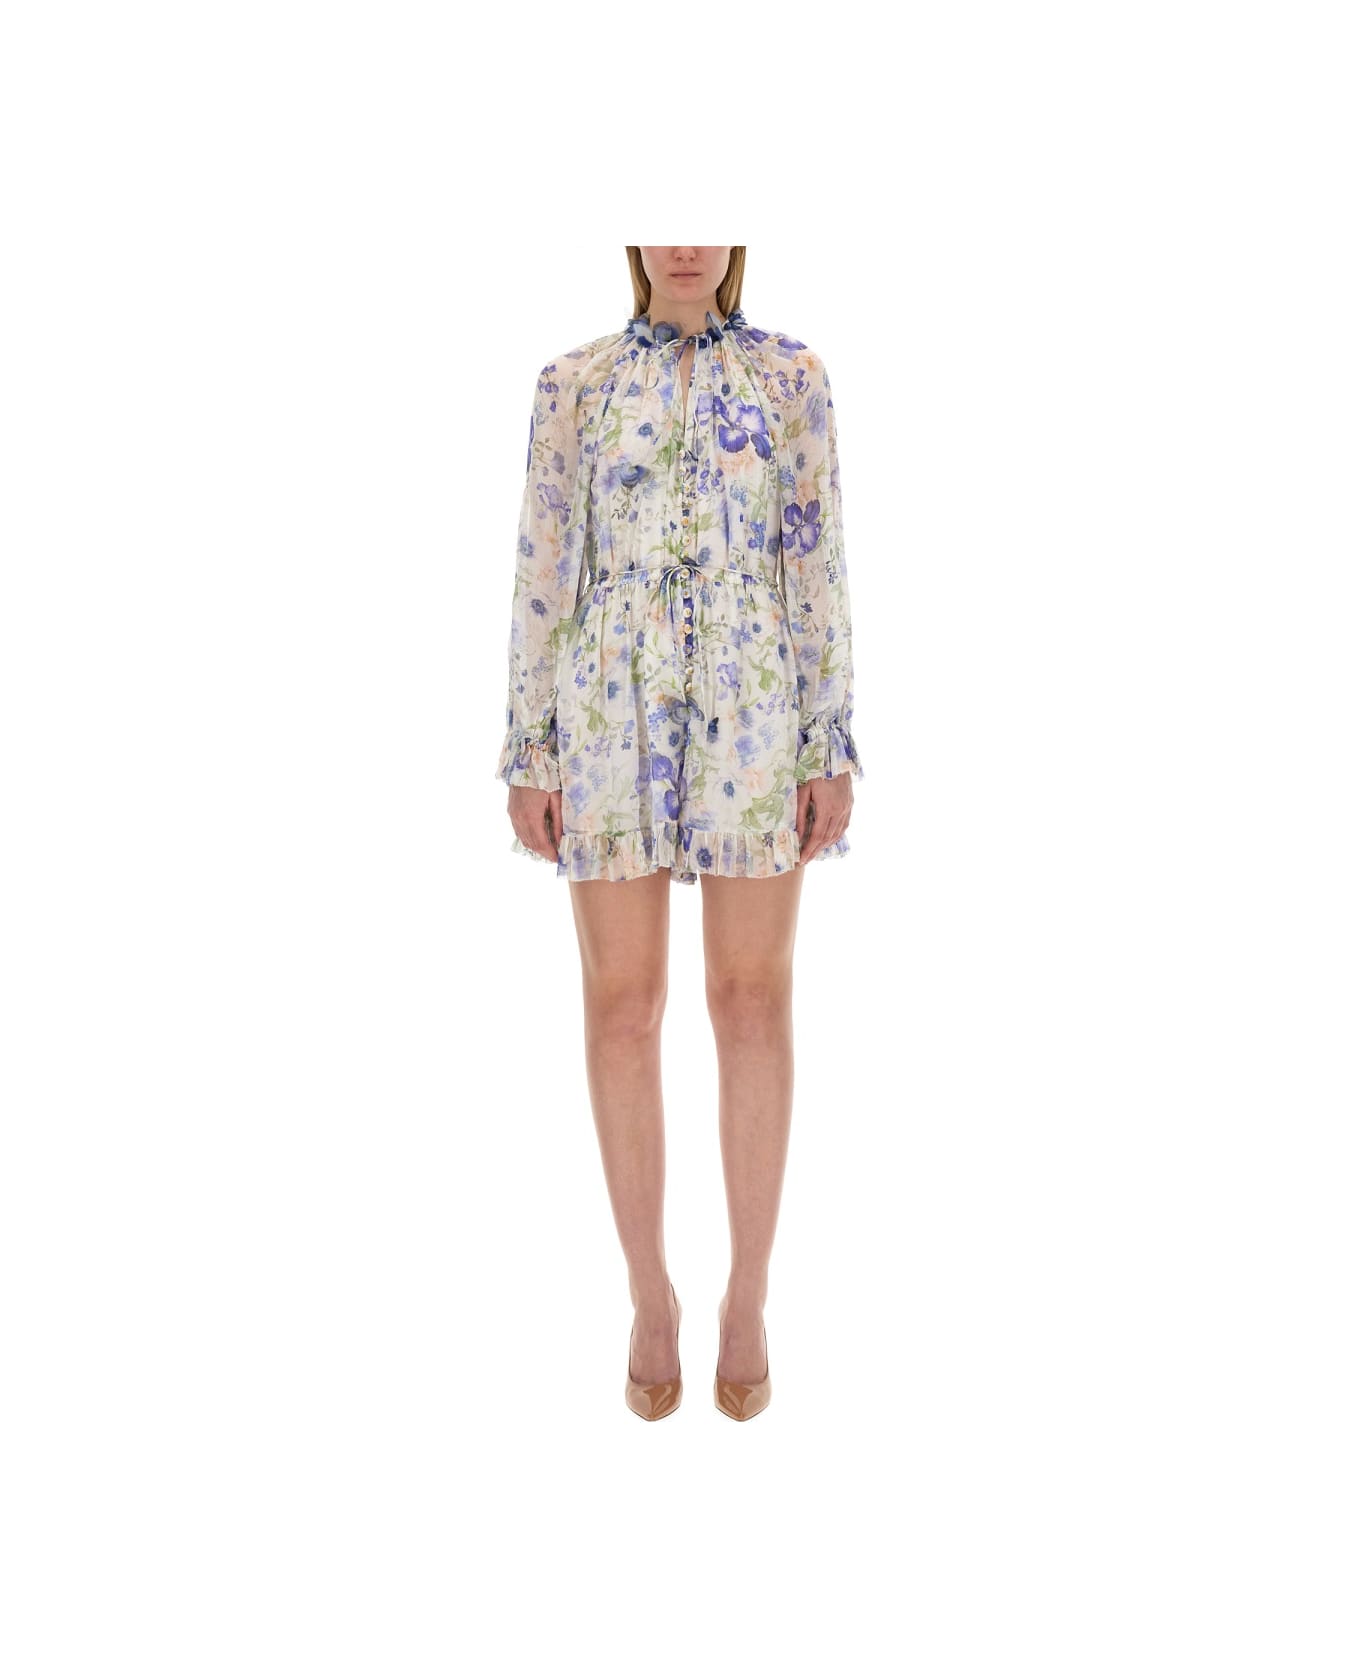 Zimmermann Dress With Floral Pattern - Blue ジャンプスーツ